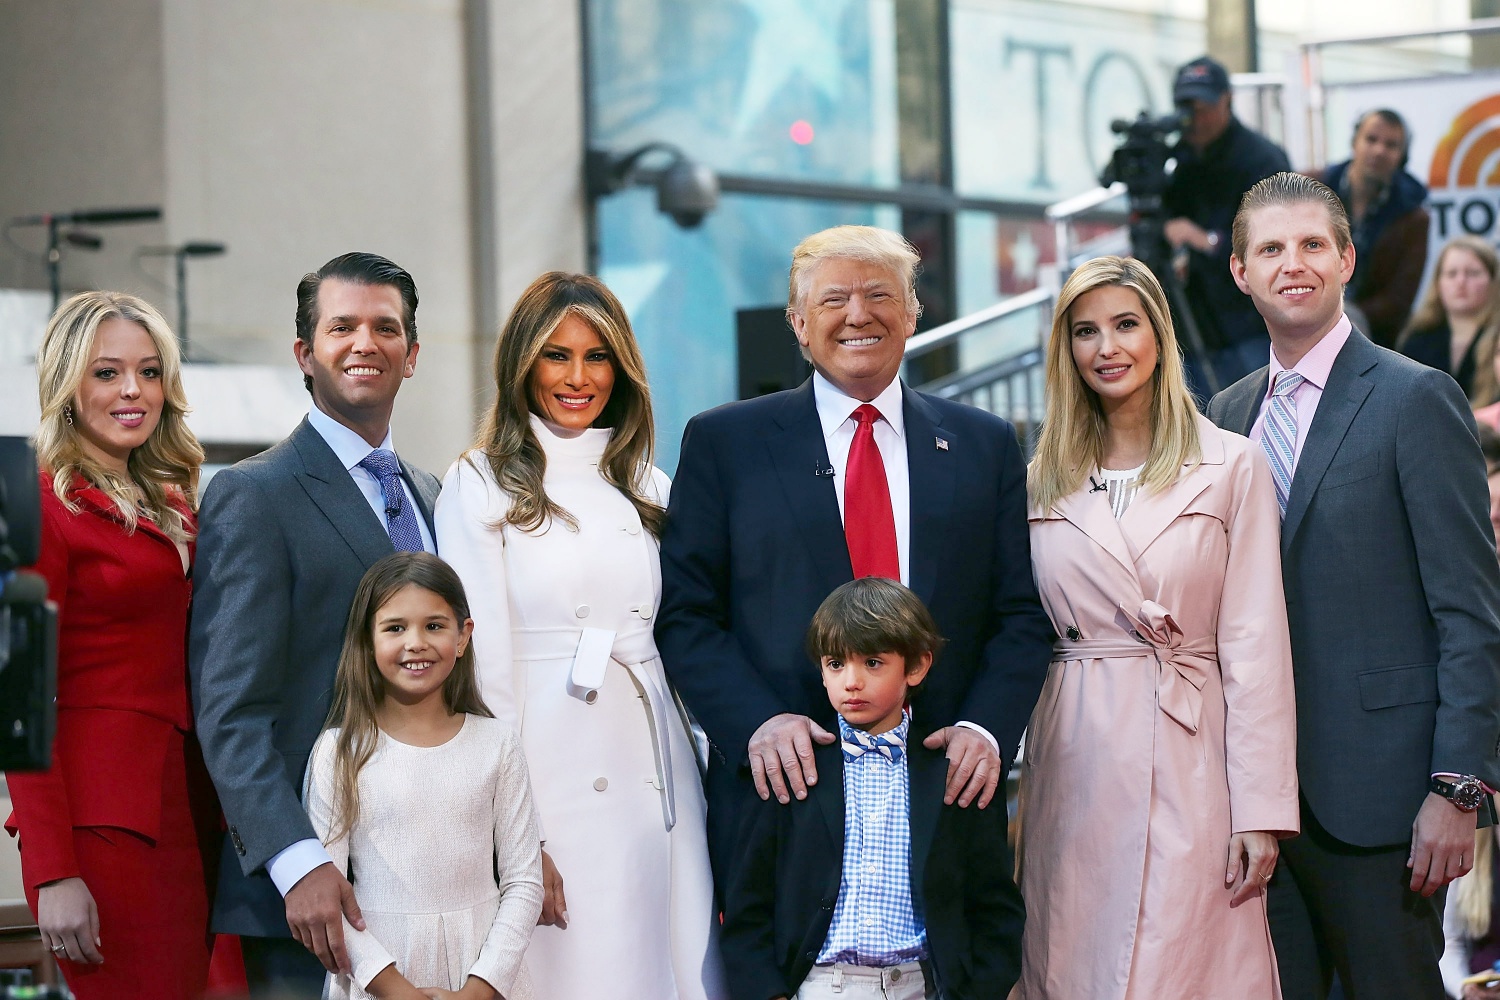 Donald Trump stands with his wife Melania Trump (center left) and from right: Eric Trump, Ivanka Trump, Donald Trump Jr. and Tiffany Trump